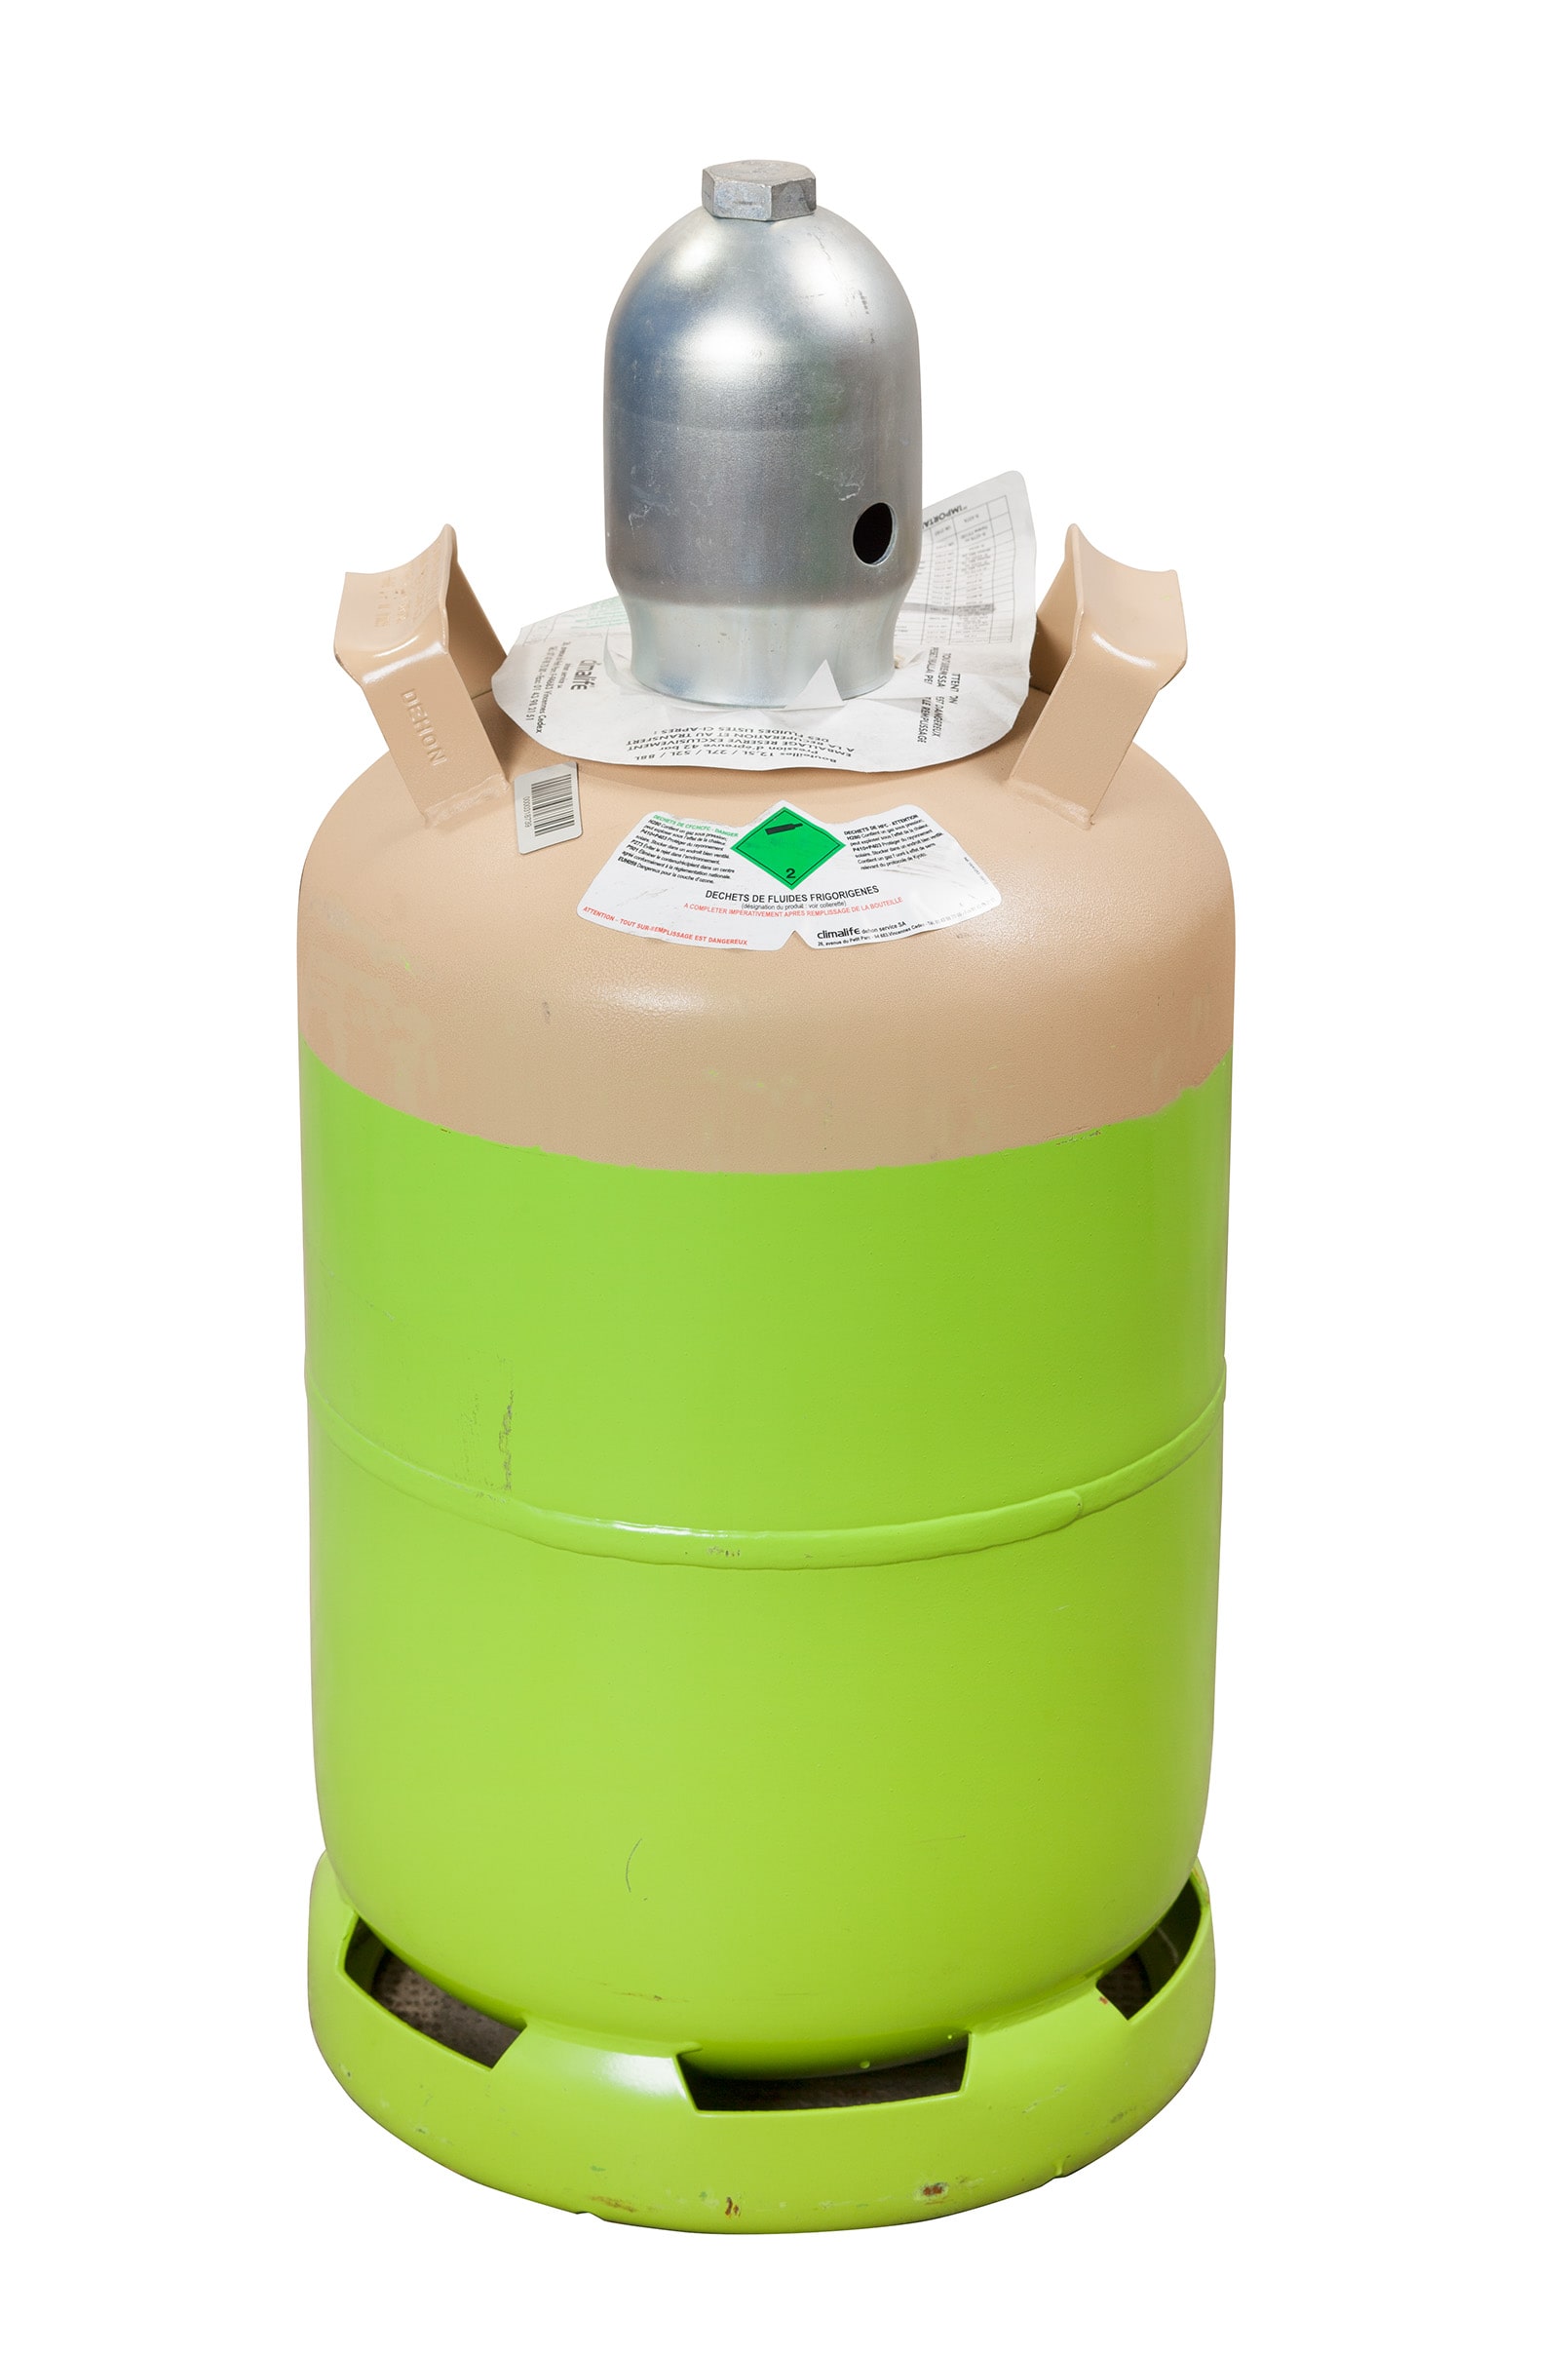 Recovery cylinders - non-flammable refrigerants - Climalife